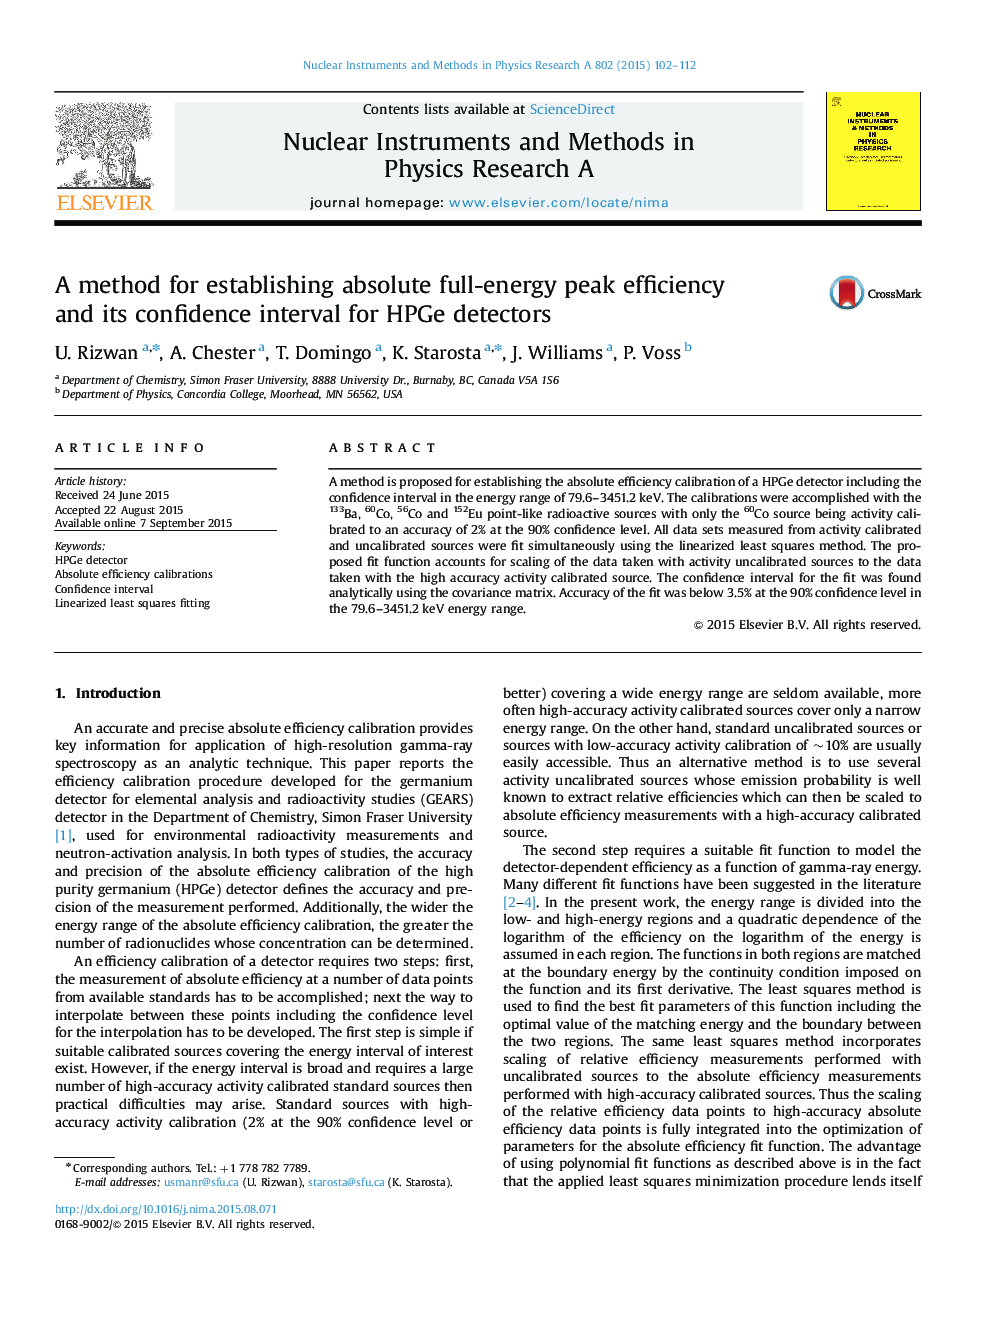 A method for establishing absolute full-energy peak efficiency and its confidence interval for HPGe detectors